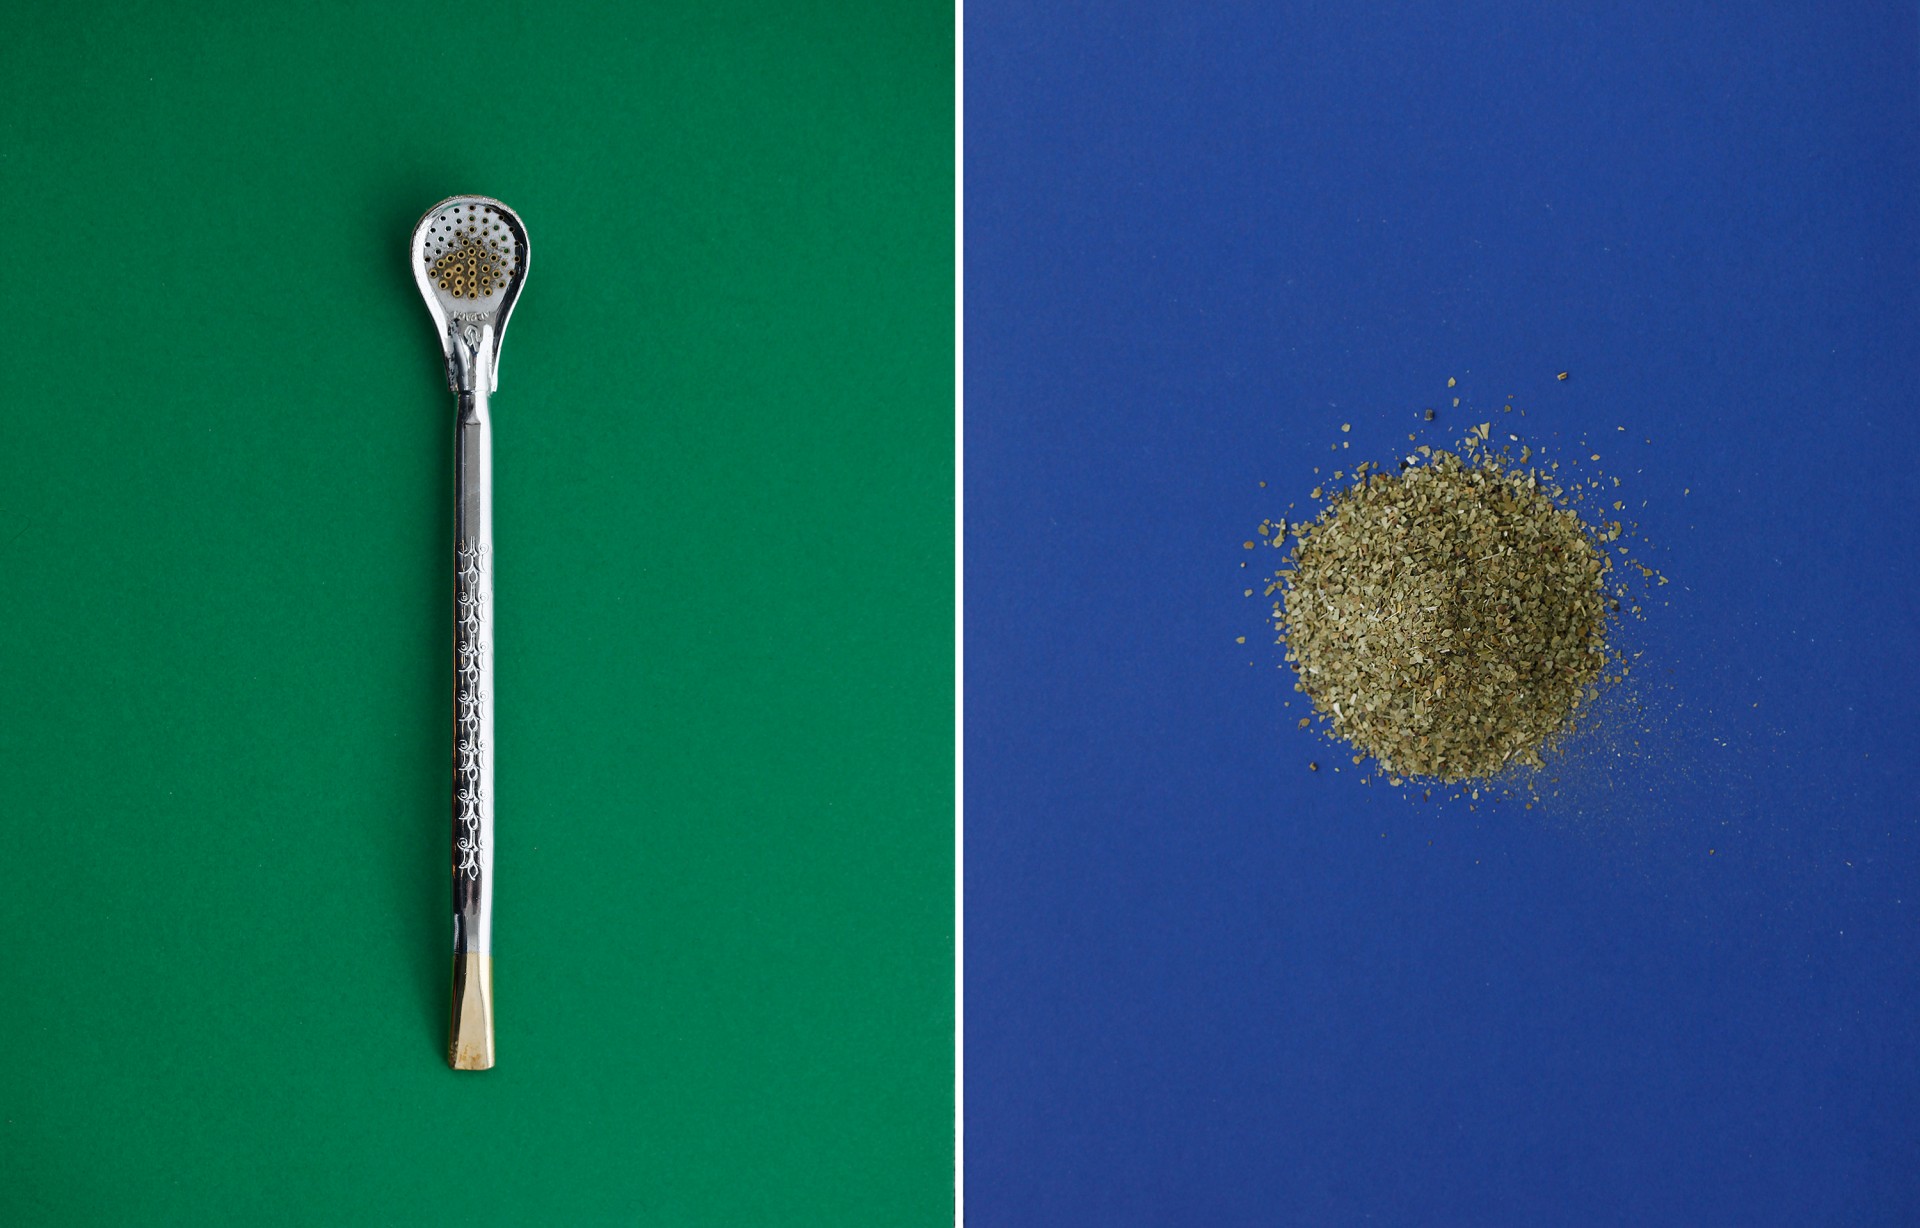 (Left) A bombilla, the metal drinking straw with a strainer at one end that's used to sip yerba mate. (Right) Mate leaves. Photos: Ryan Kellman/Meredith Rizzo/NPR